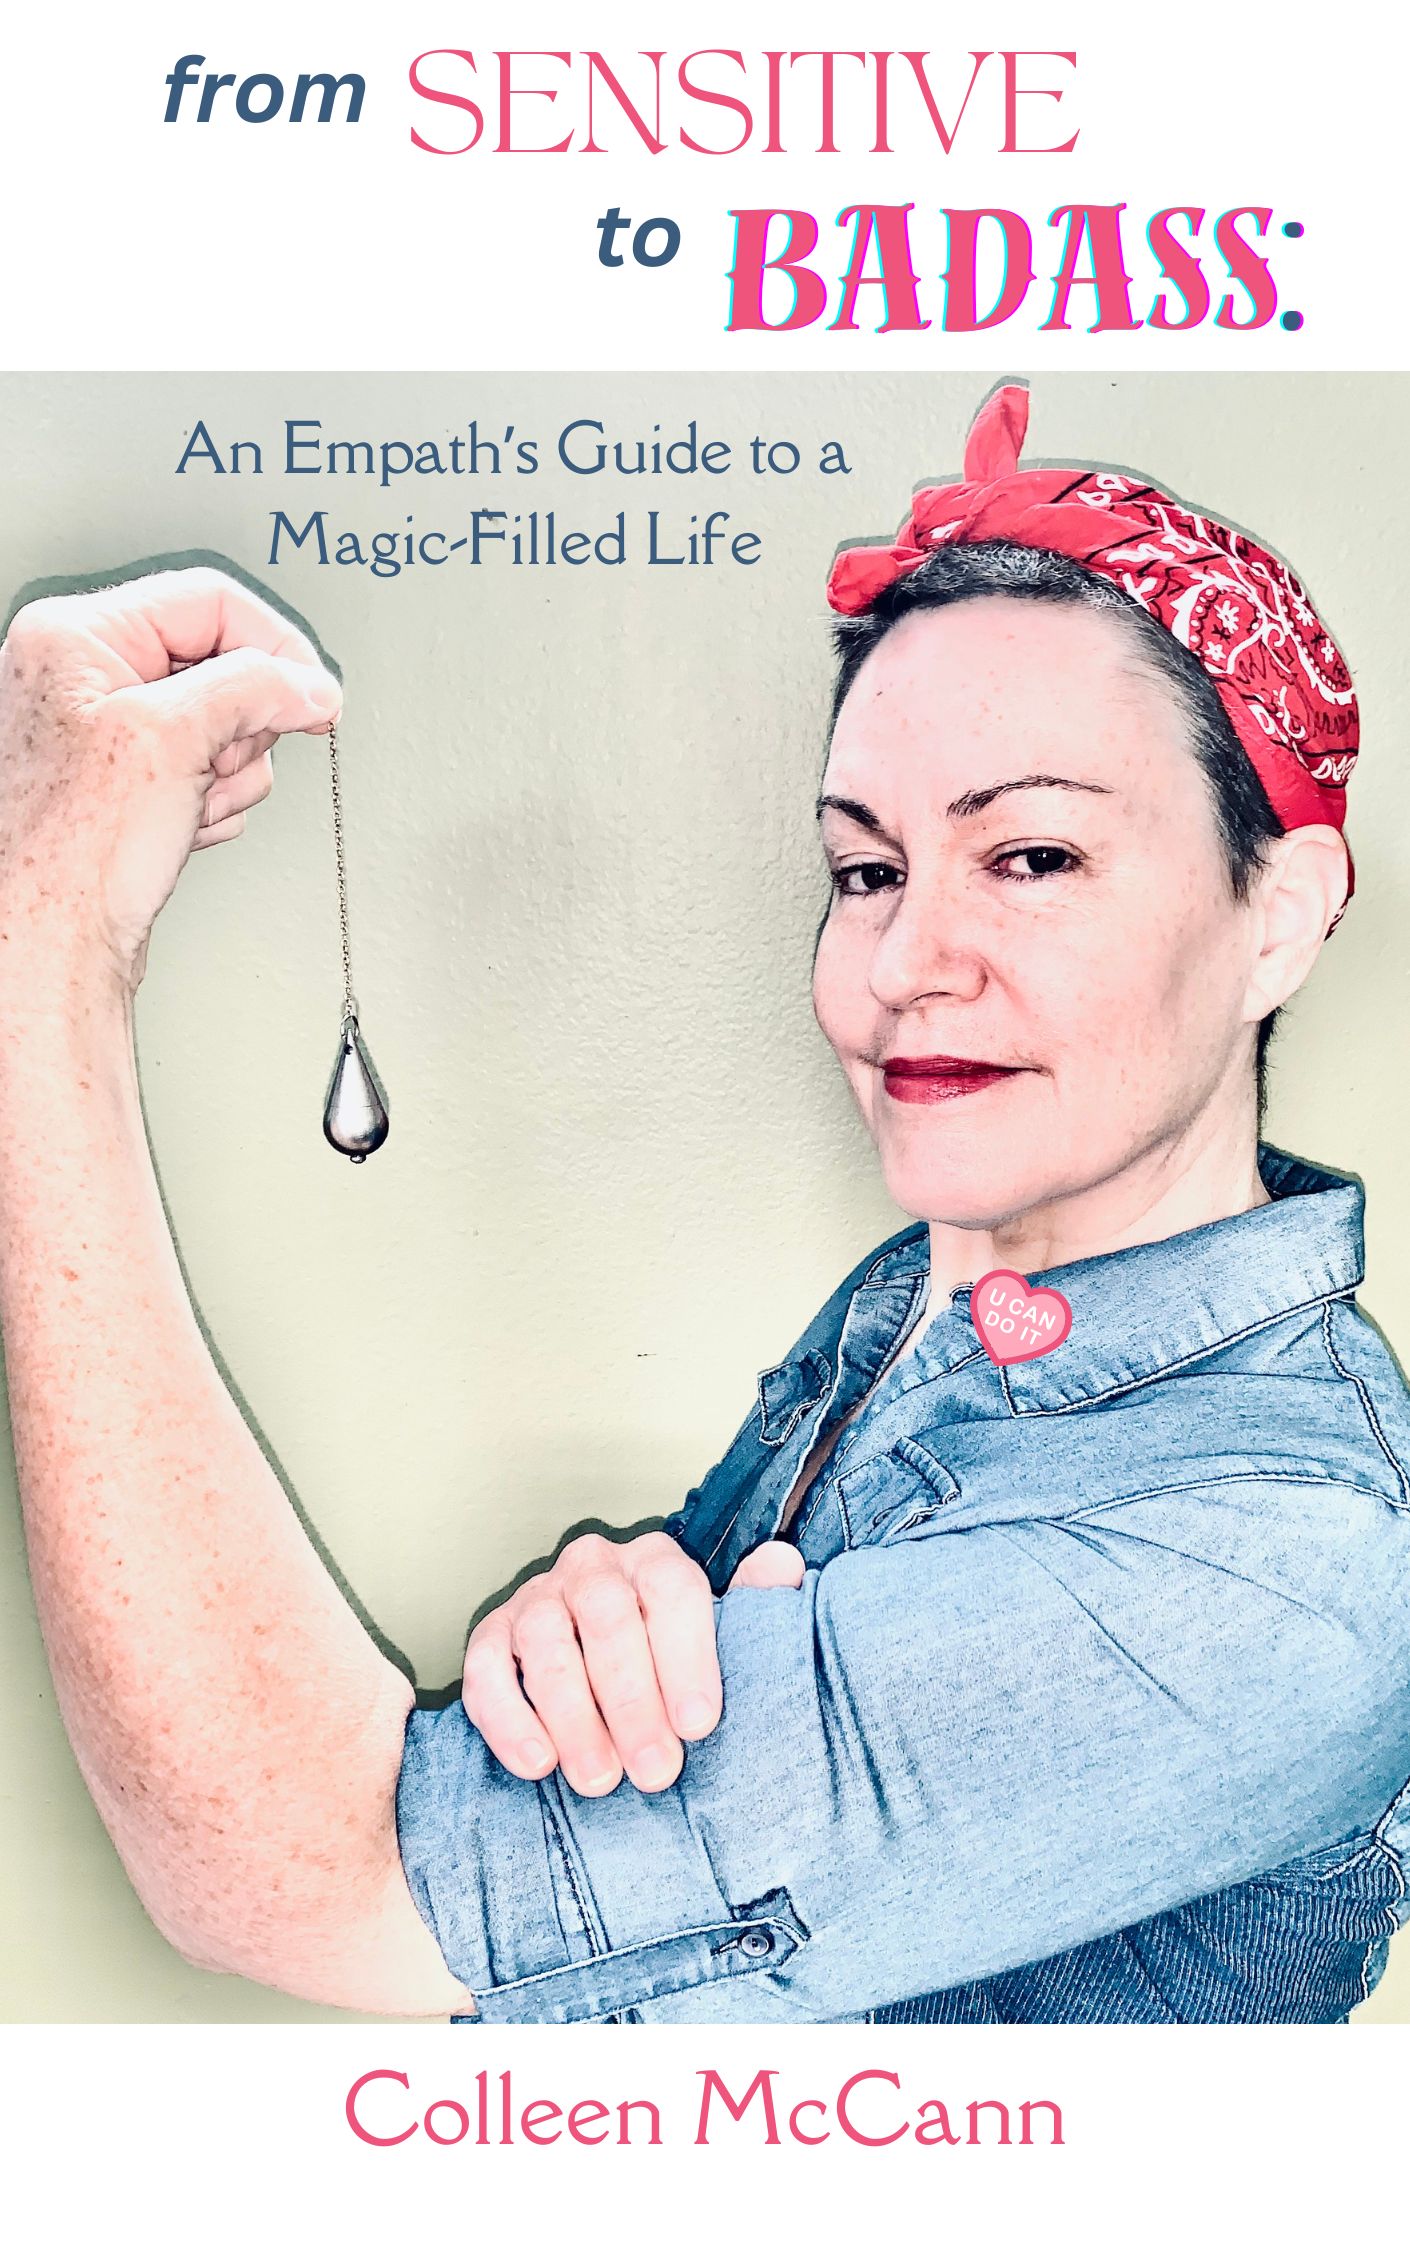 From Sensitive to Badass: An Empath's Guide to a Magic Filled Life by Colleen McCann